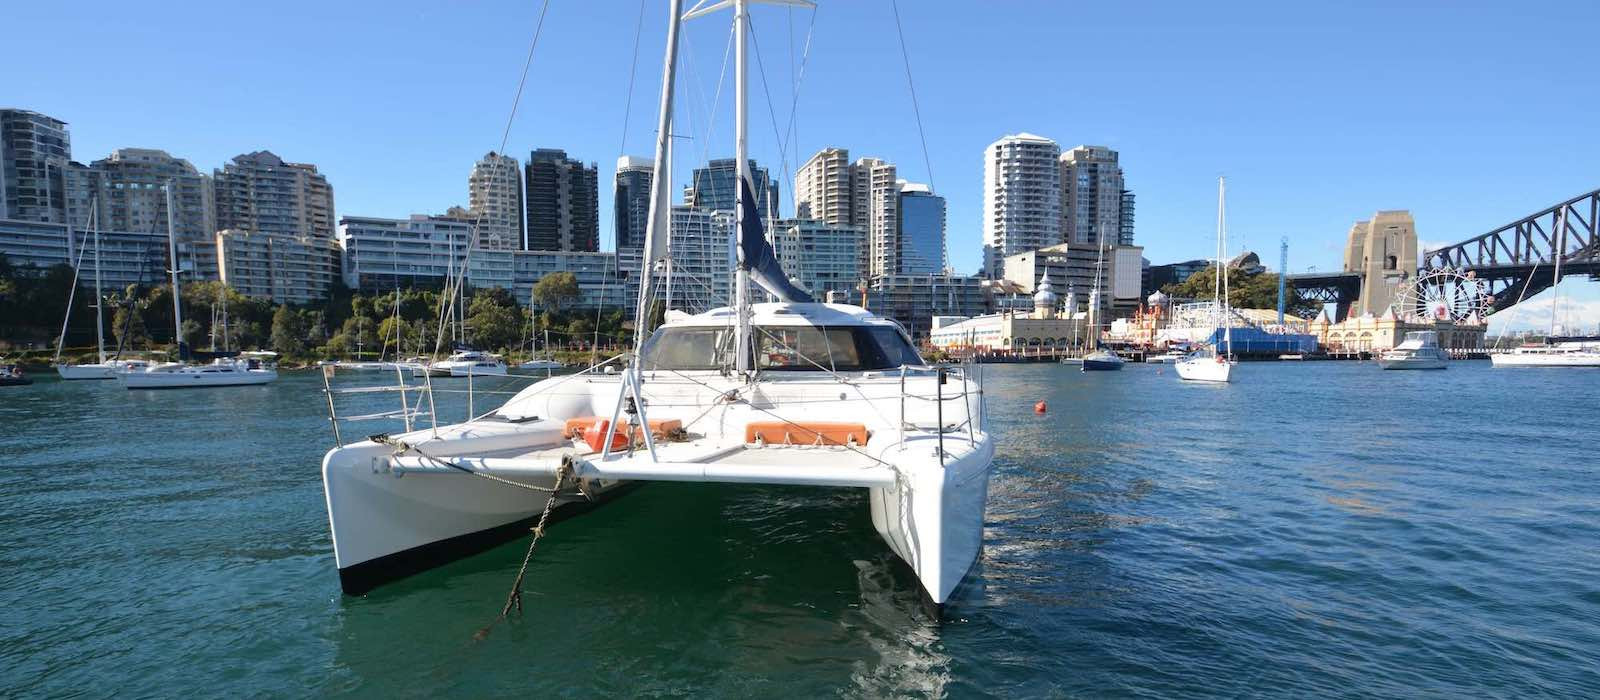 Harbour Bridge background with Skippered yacht charter on Seawind 1000